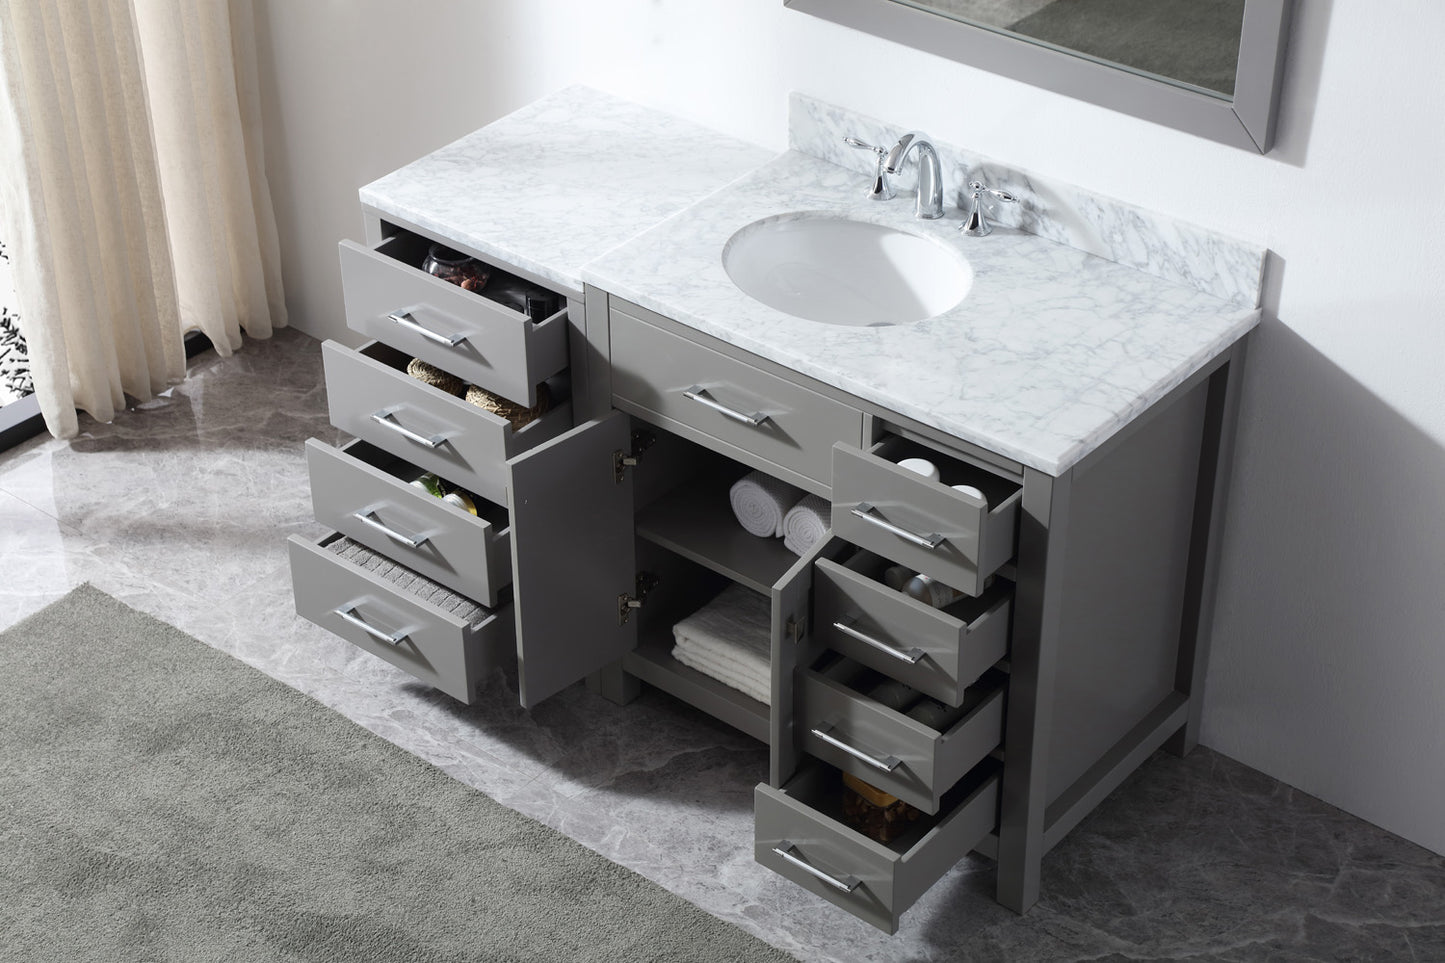 Virtu USA Caroline Parkway 57" Single Bath Vanity in Cashmere Grey with Marble Top and Round Sink with Brushed Nickel Faucet and Mirror - Luxe Bathroom Vanities Luxury Bathroom Fixtures Bathroom Furniture